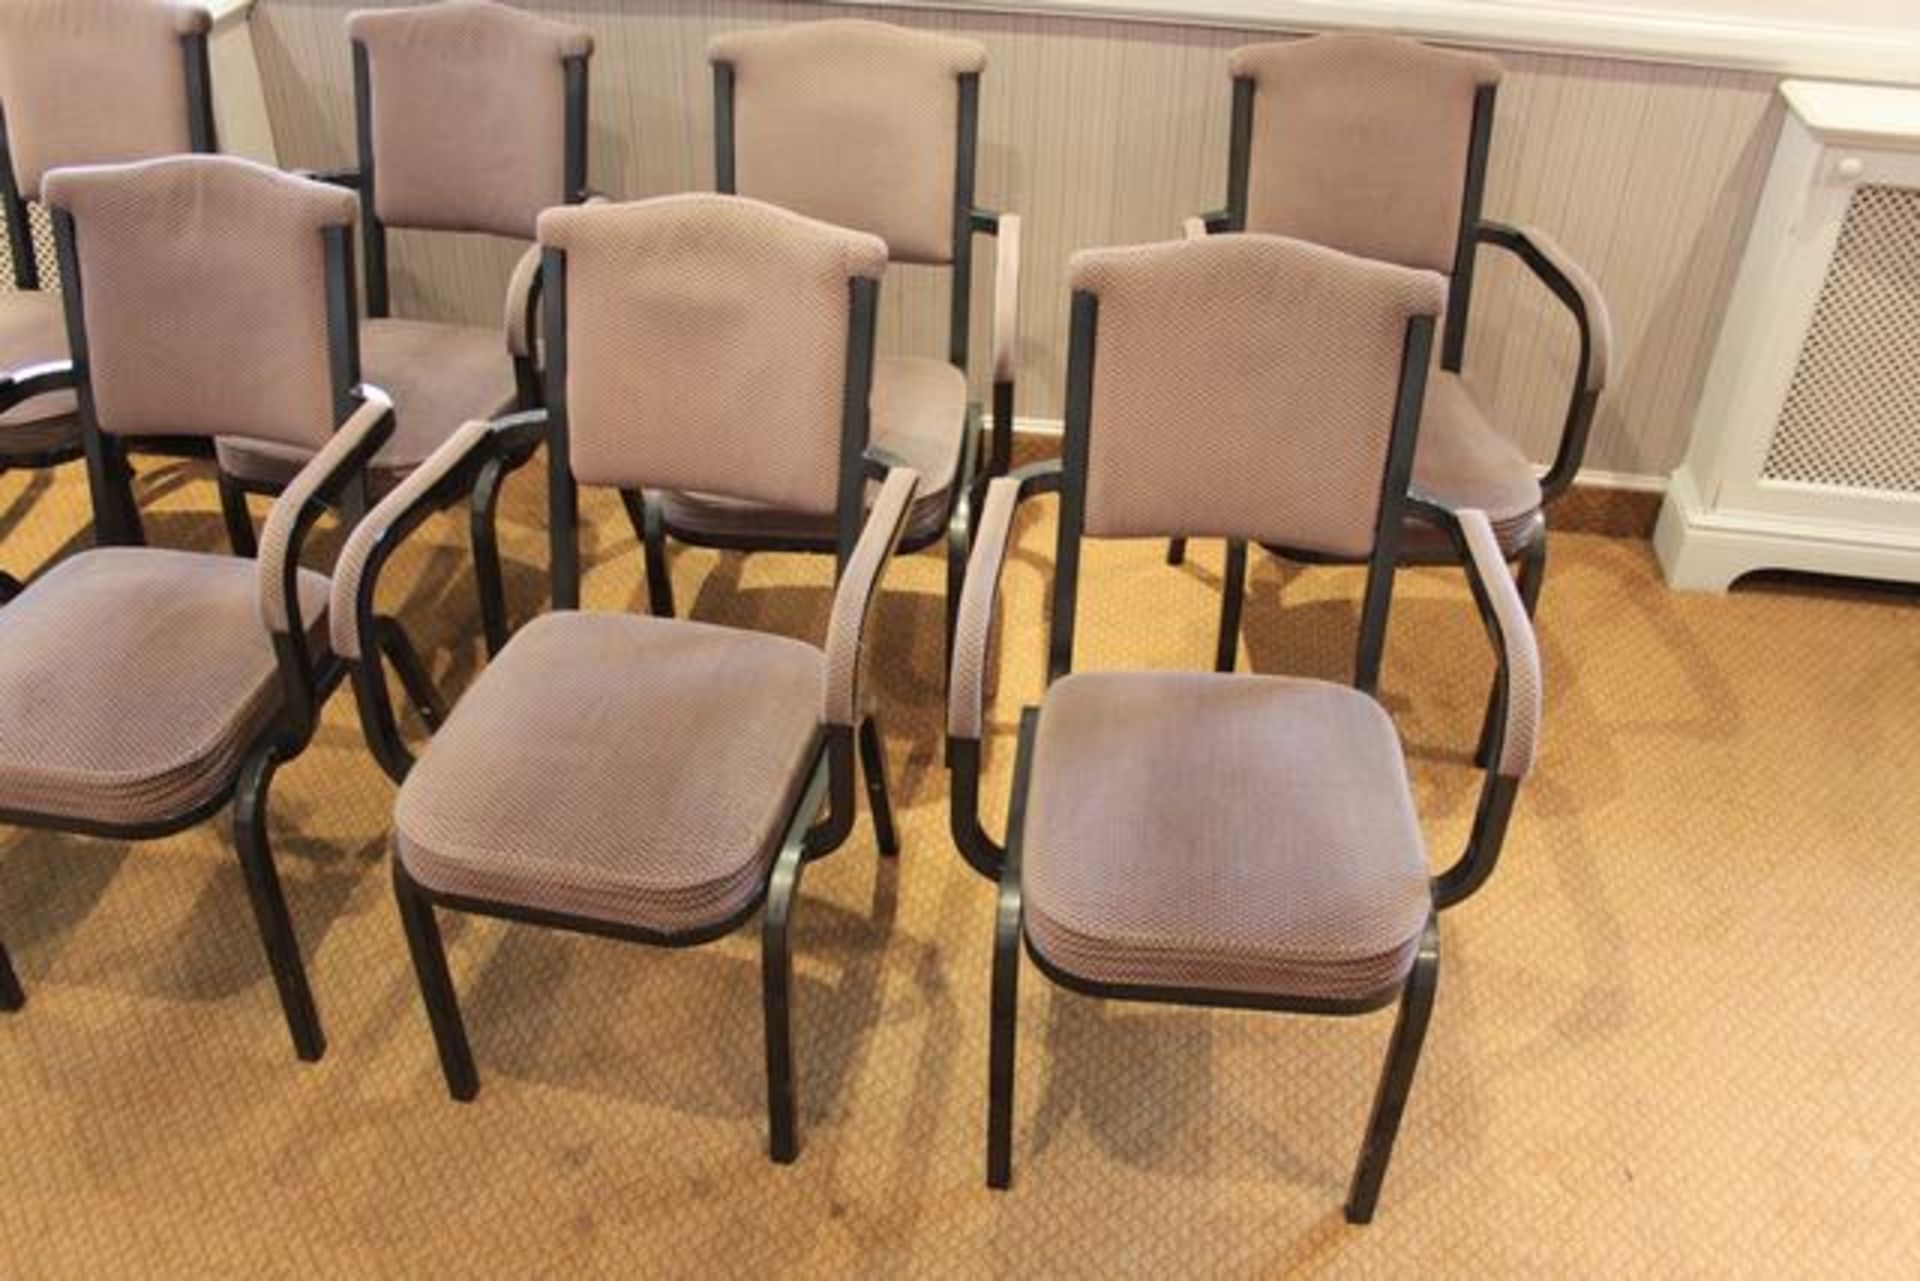 10 x Burgess stacking conference  arm chairs seat pitch 420mm x 850mm tall  Lift out charge  10